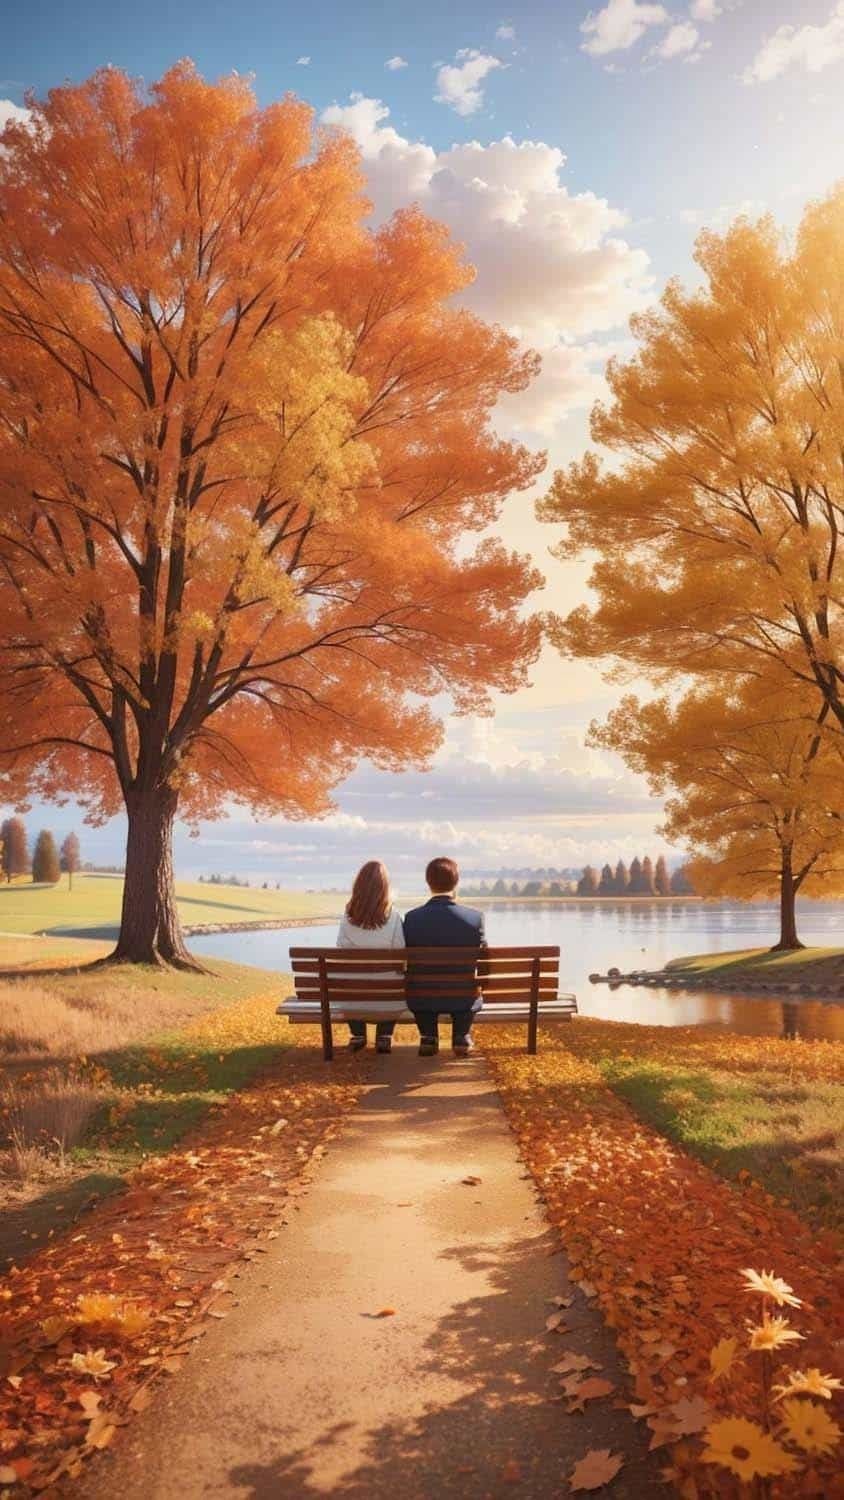 Autumn Couple iPhone Wallpaper  iPhone Wallpapers